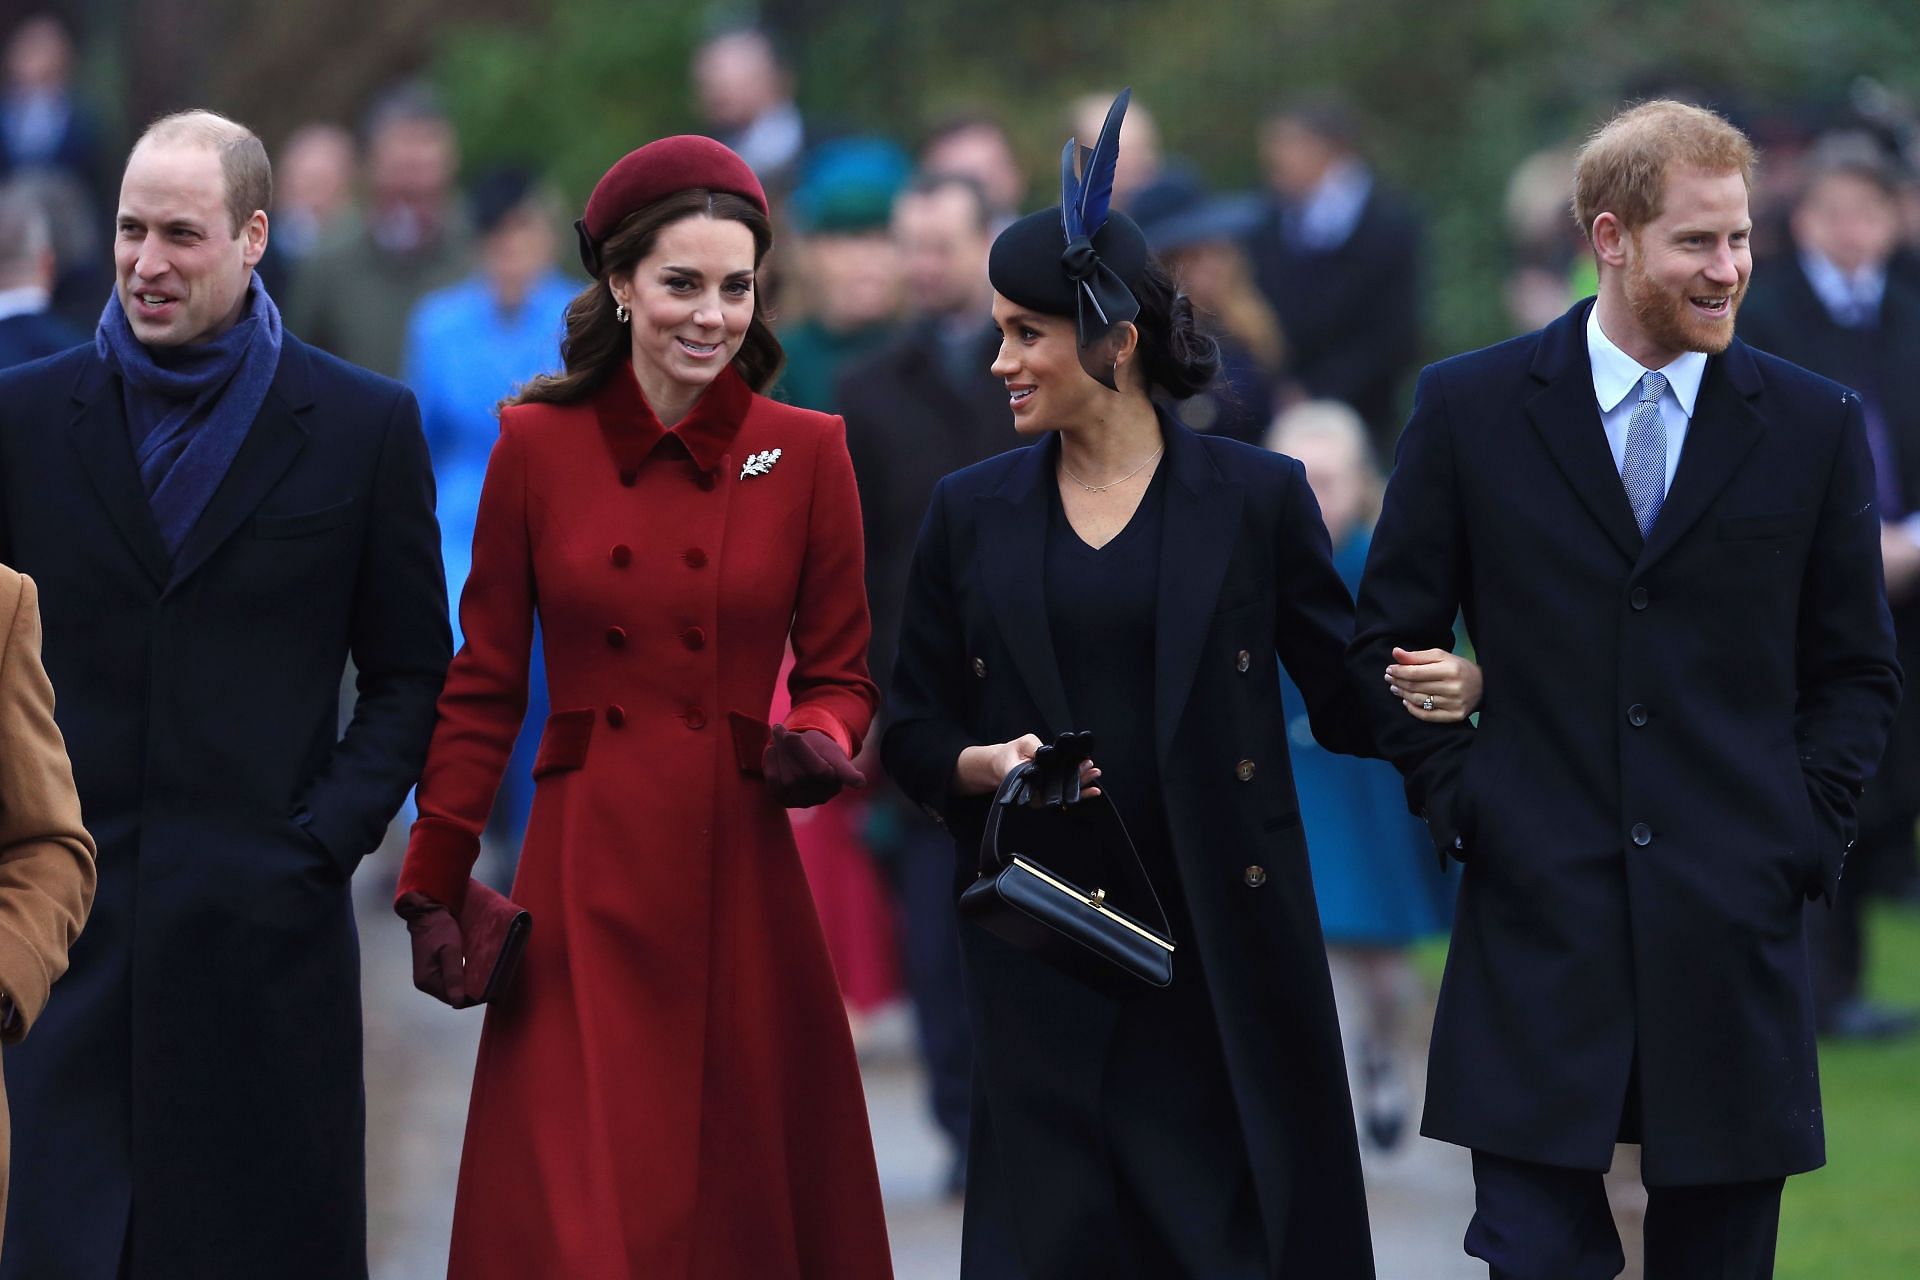 The Royal Family Attend Church On Christmas Day (Image via Getty)